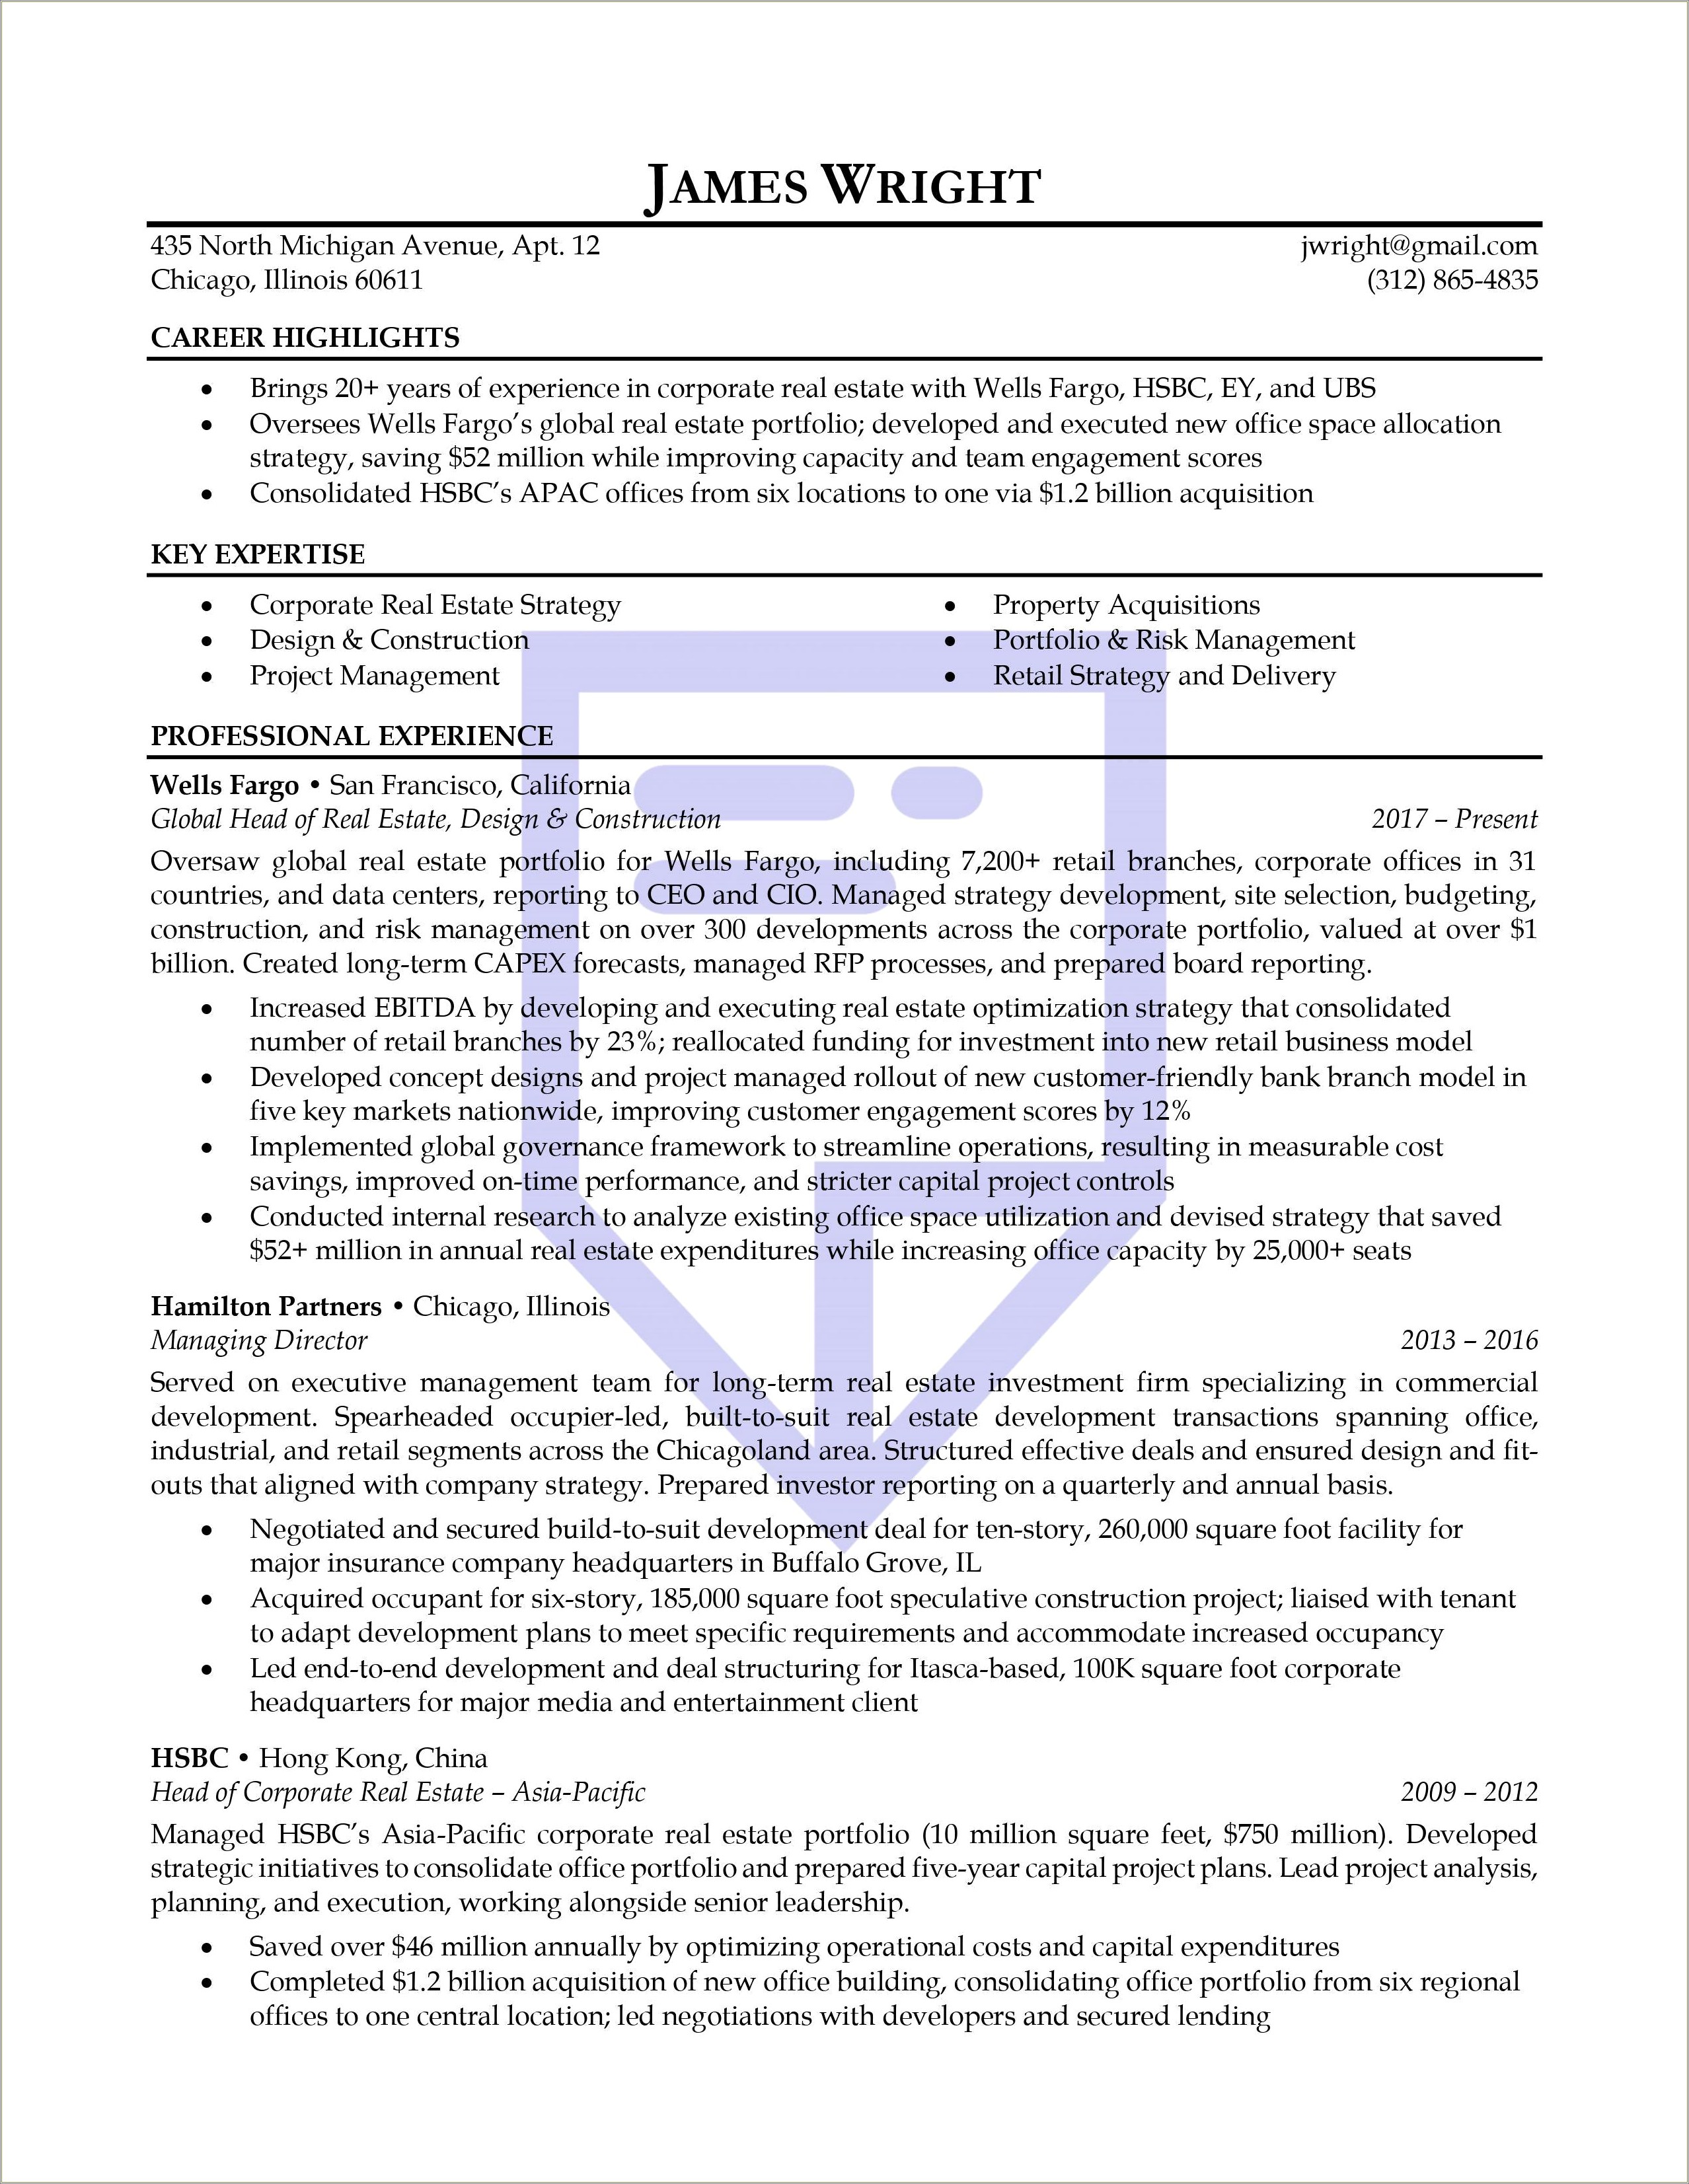 Sample List Acquisition On A Resume